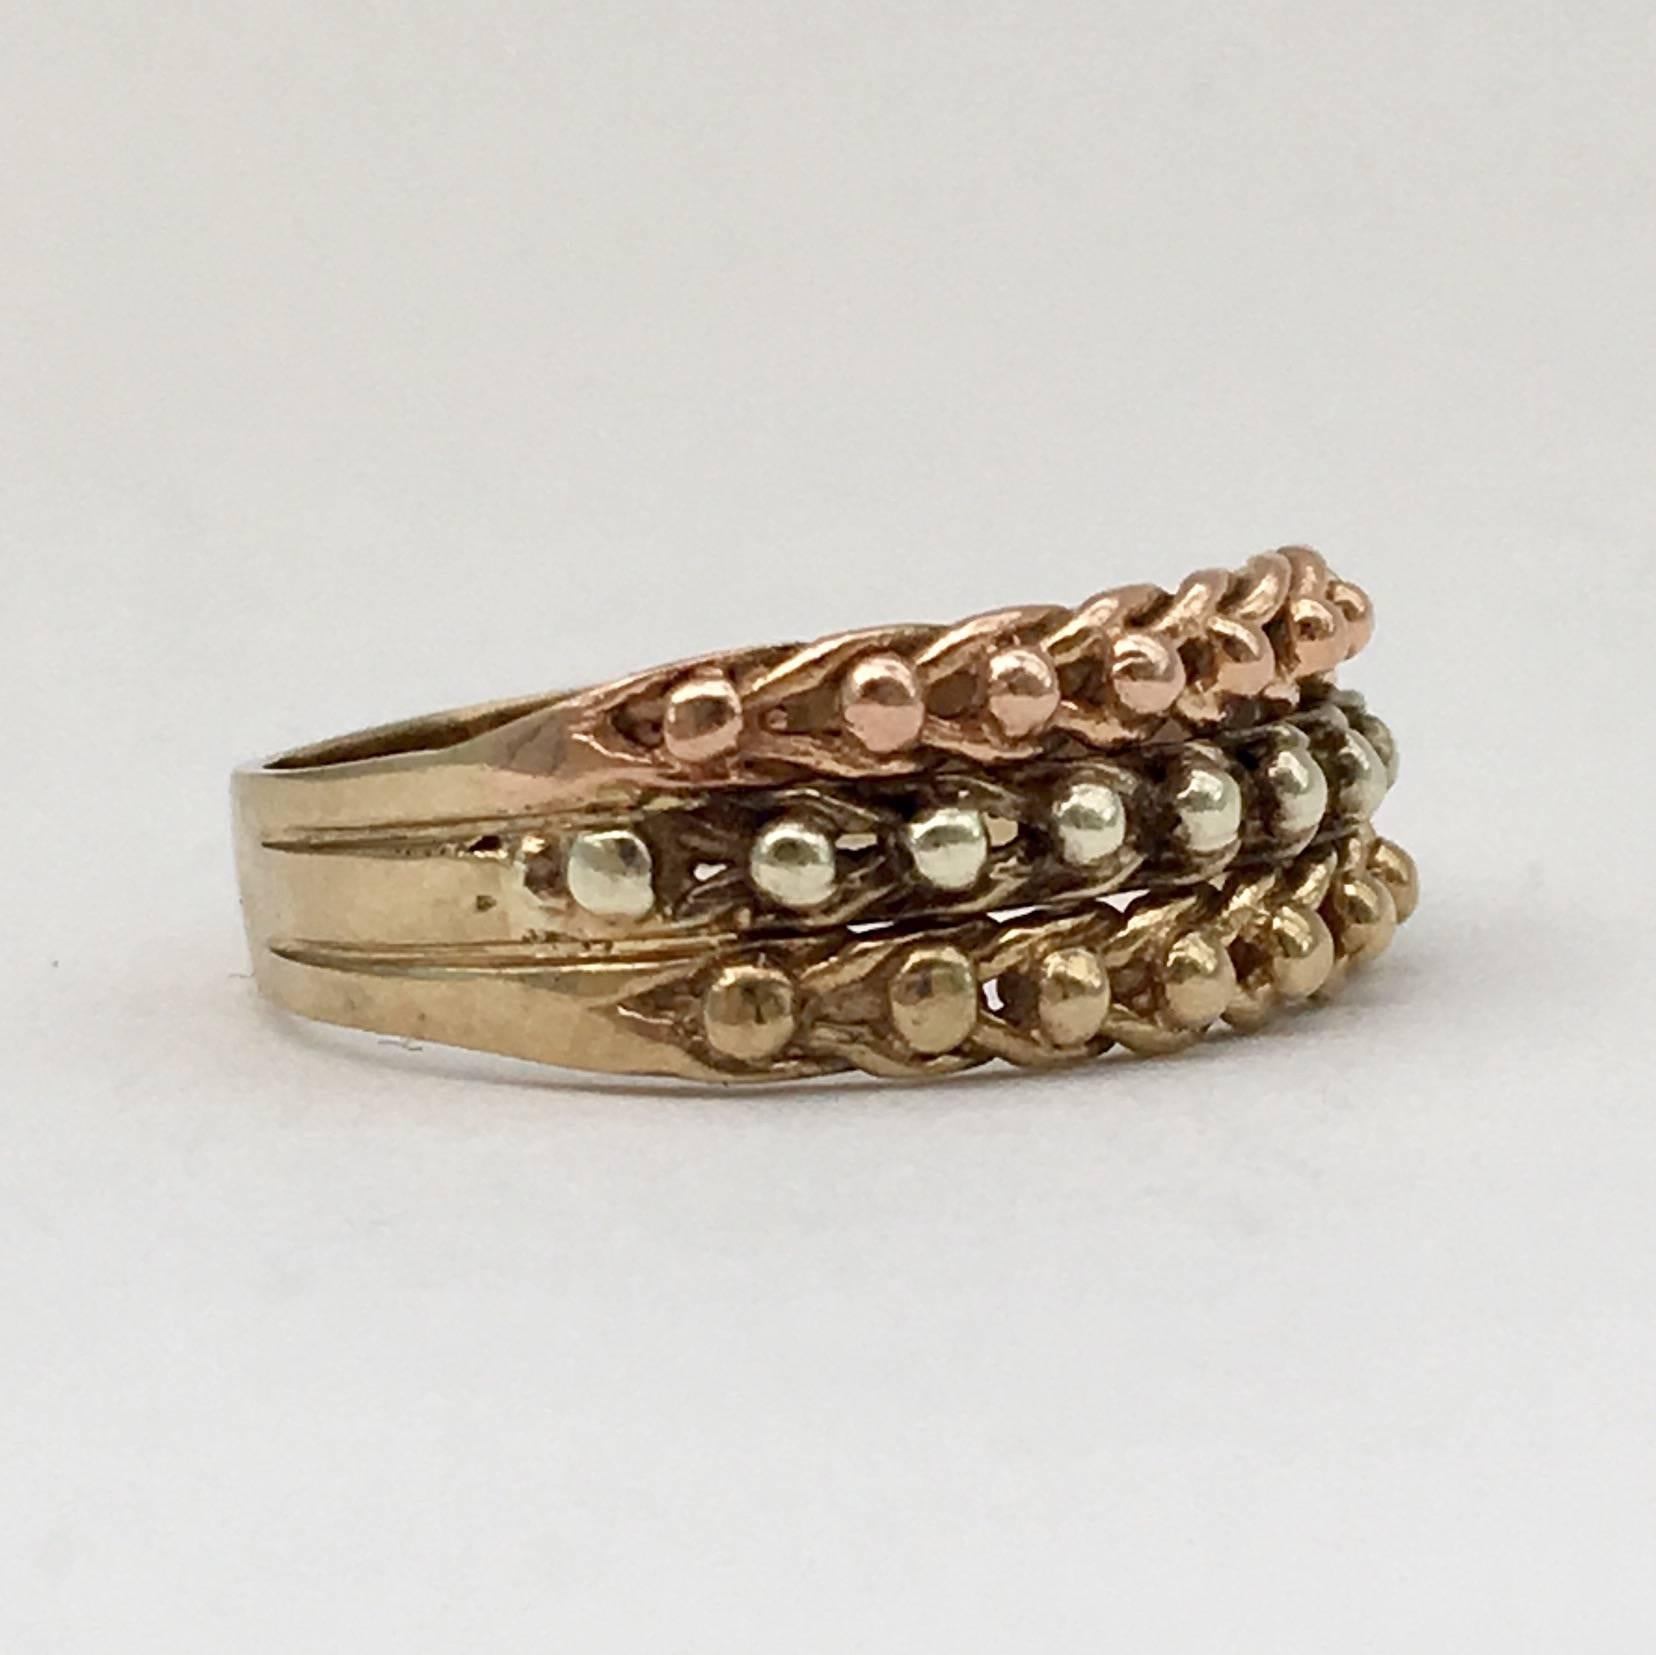 The ‘keeper’ ring or ‘guard’ ring was originally a simple band worn above a more valuable ring to prevent it sliding off the finger. Over the years, they became more elaborate in design. This is a lovely example, combining pretty braids of yellow,